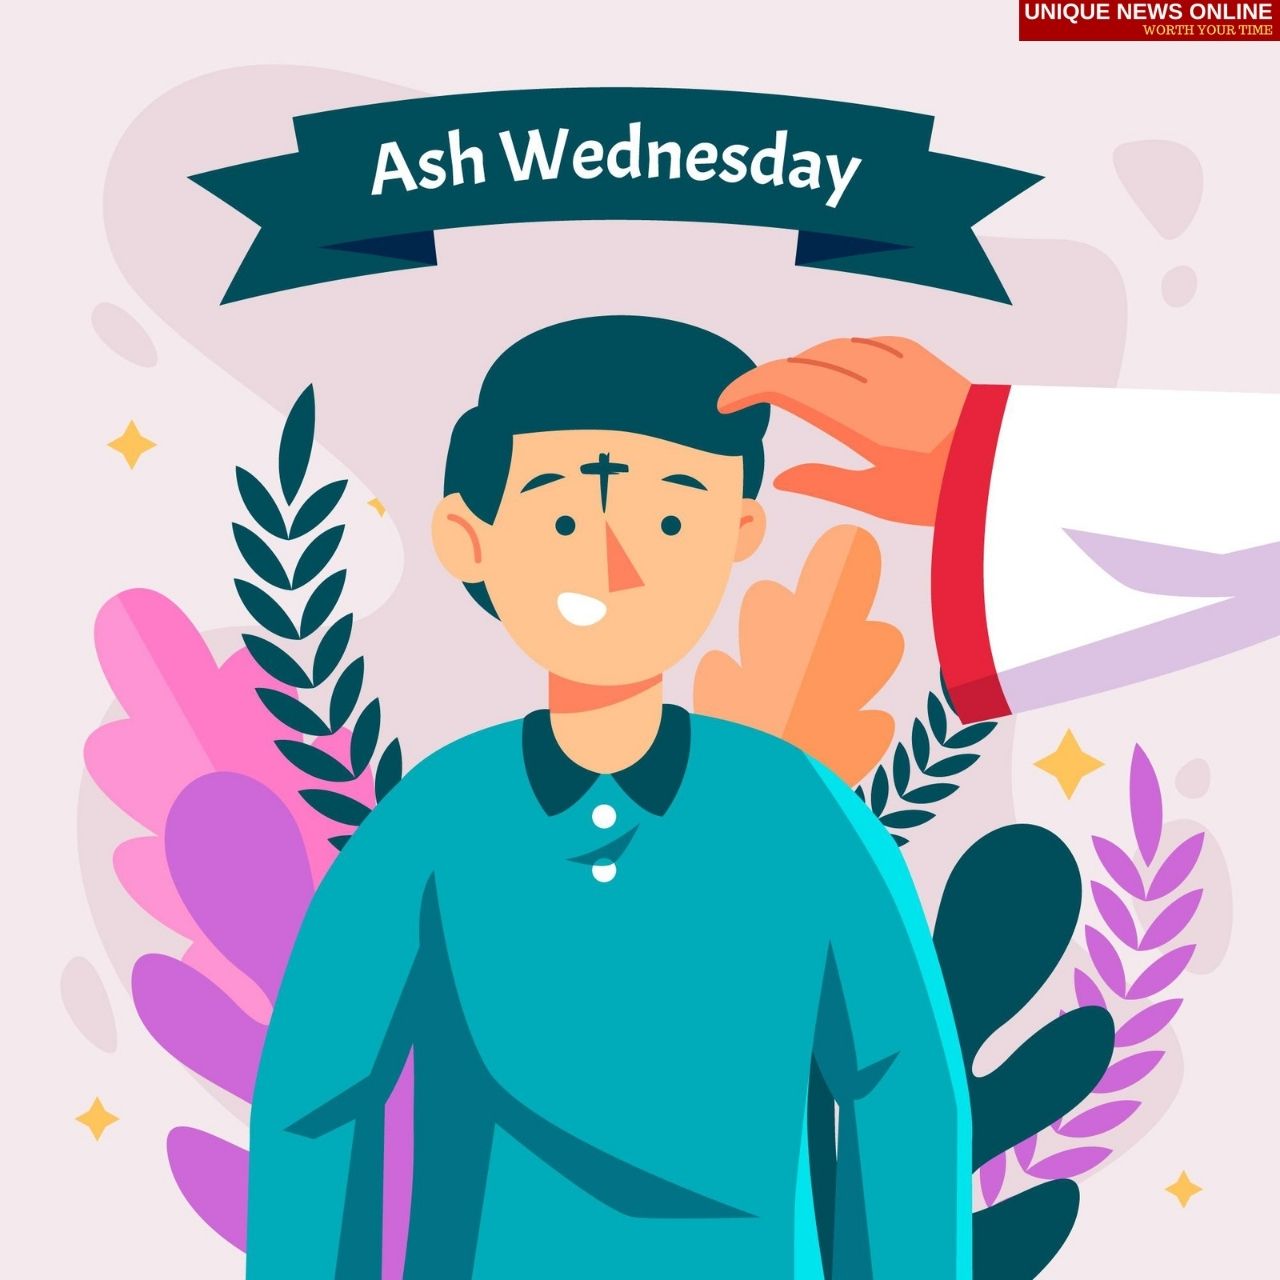 Ash Wednesday 2022: Wishes, Quotes, HD Images, Messages, Greetings, Cliparts, Sayings to Share